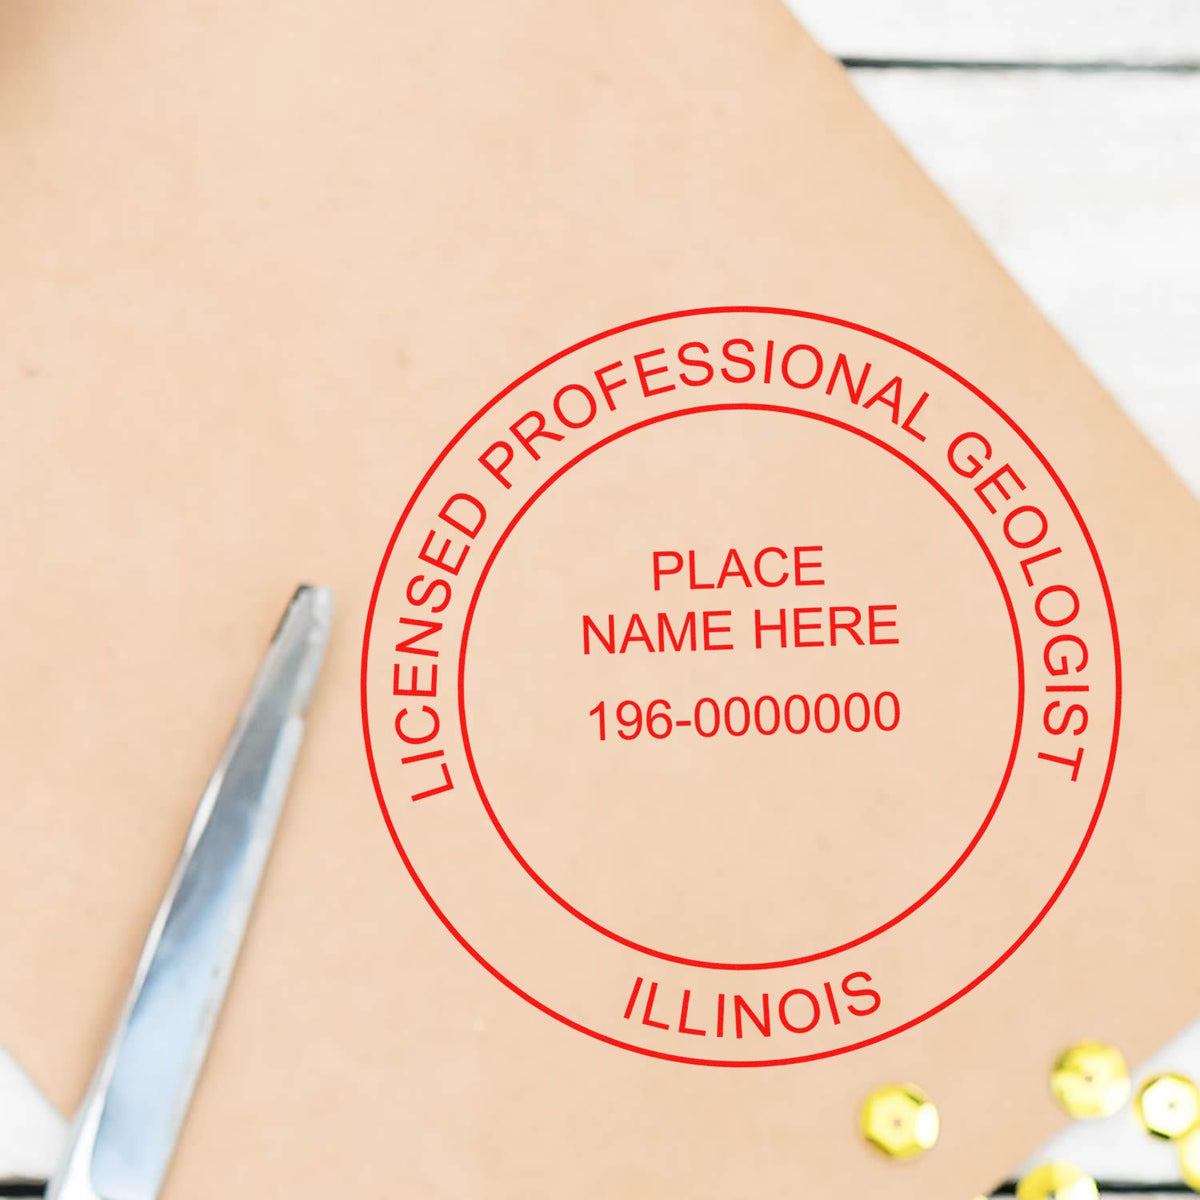 The Premium MaxLight Pre-Inked Illinois Geology Stamp stamp impression comes to life with a crisp, detailed image stamped on paper - showcasing true professional quality.